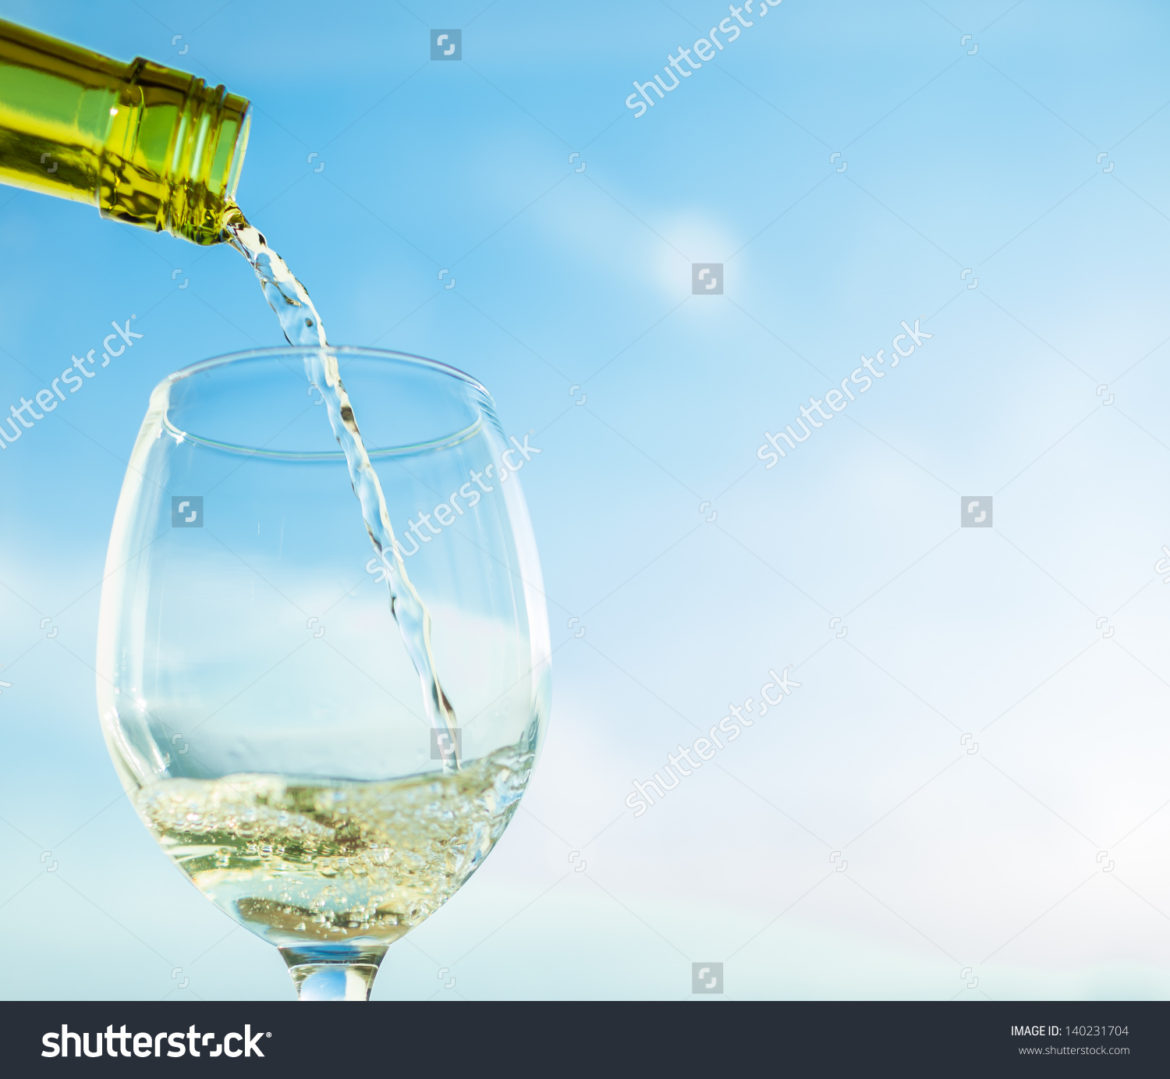 stock-photo-pouring-a-glass-of-wine-140231704.jpg